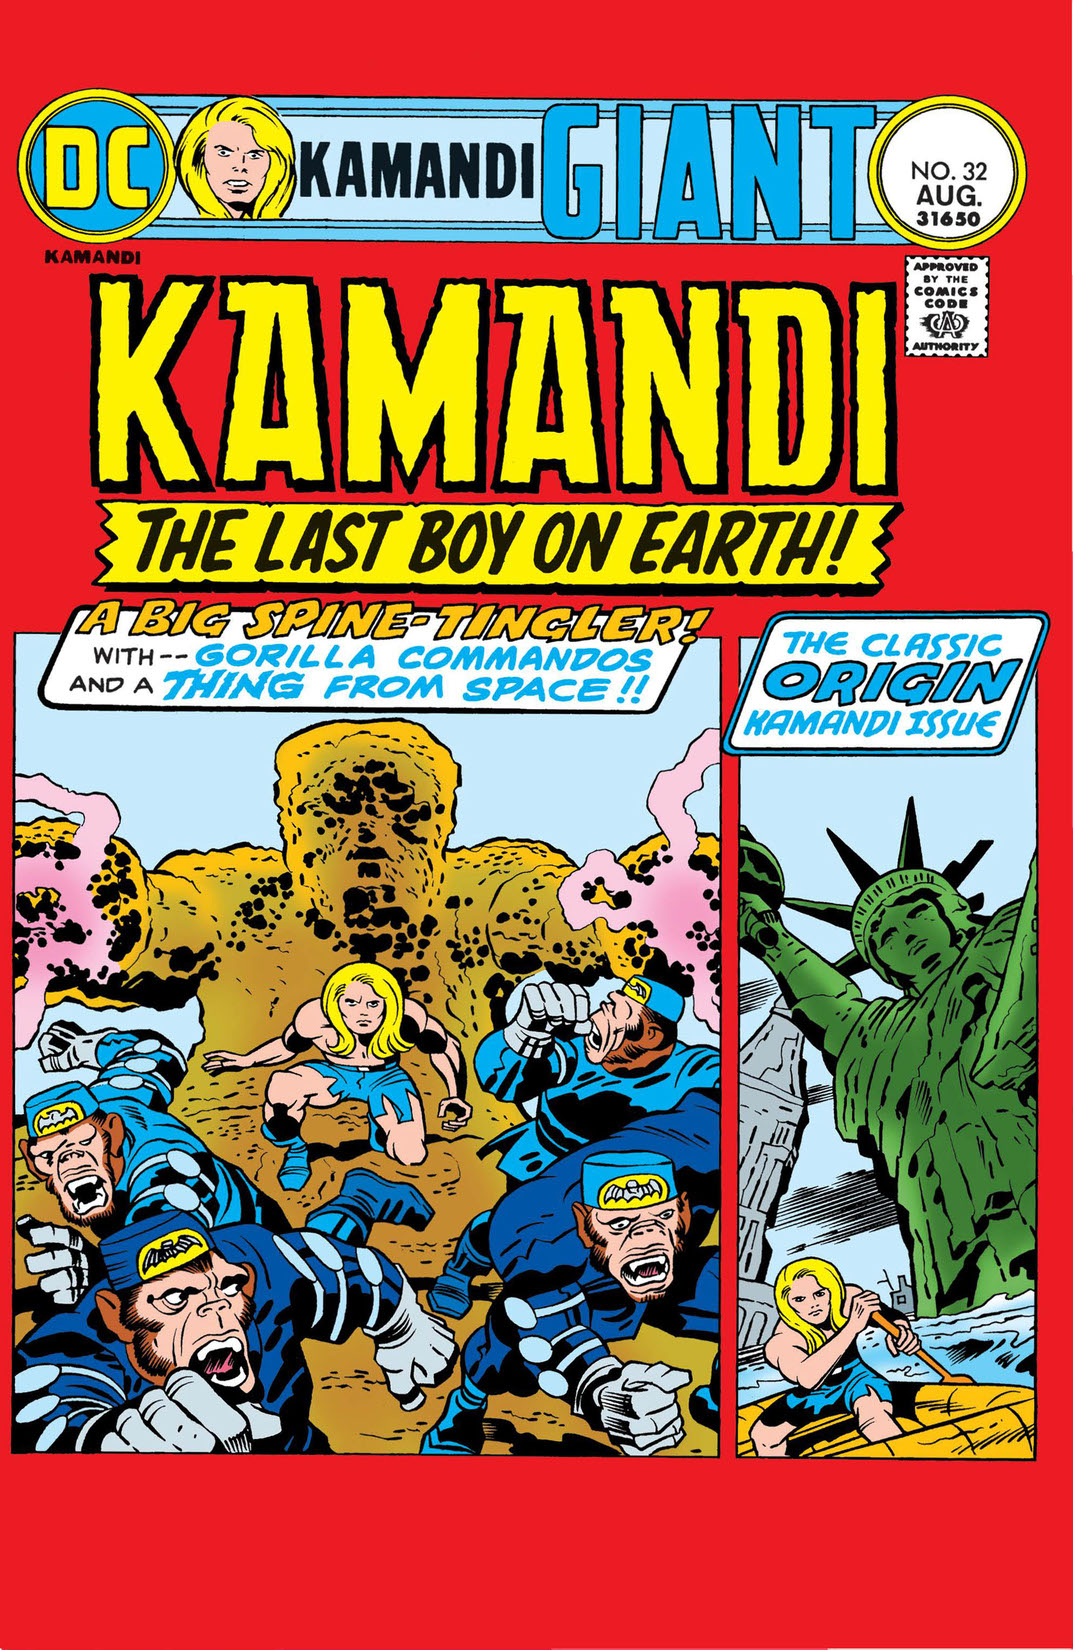 Kamandi: The Last Boy on Earth #32 preview images